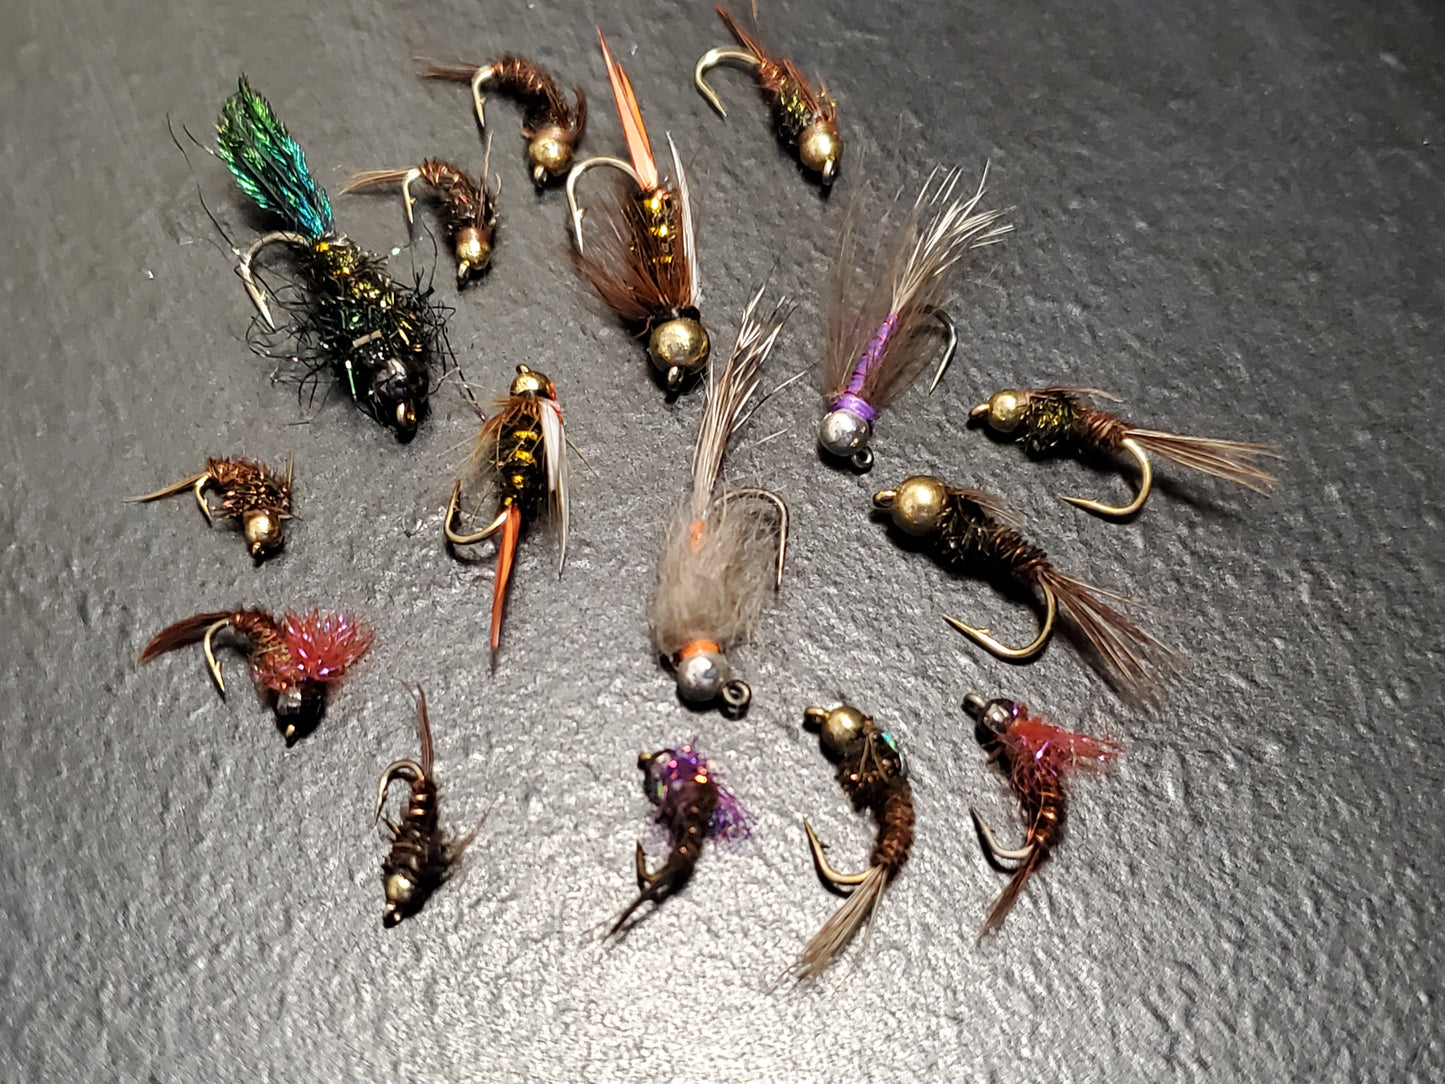 Tungsten Bead Head Trout Selection 16 Fly Selection, Bead Head